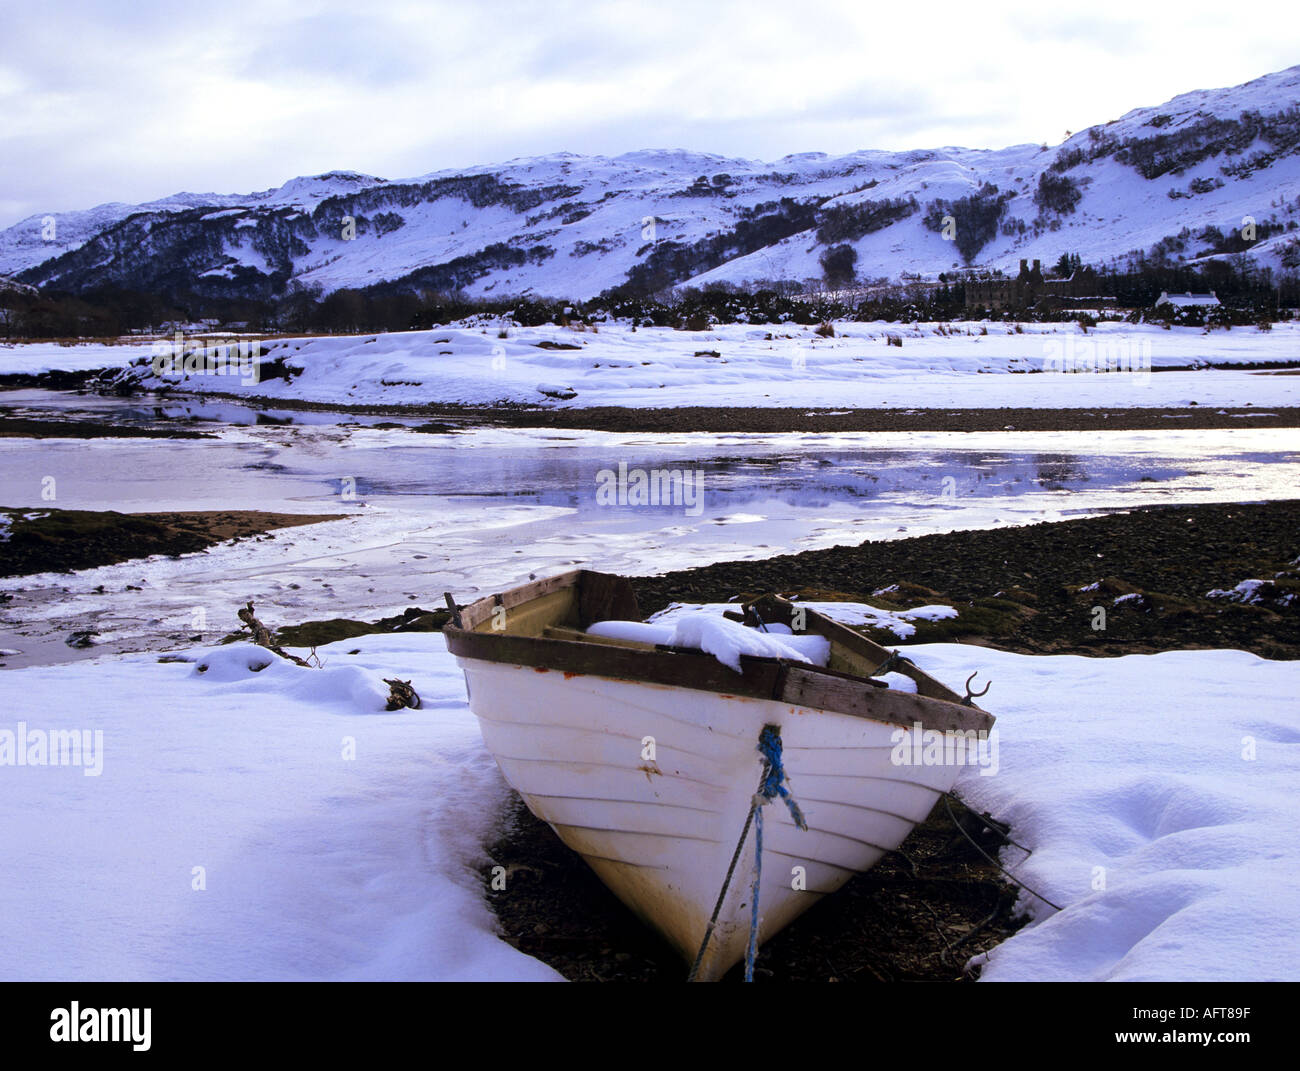 GLENELG SCOTTISH HIGHLANDS UK February Looking out over Glenmore River with a moored boat in the foreground in snow Stock Photo